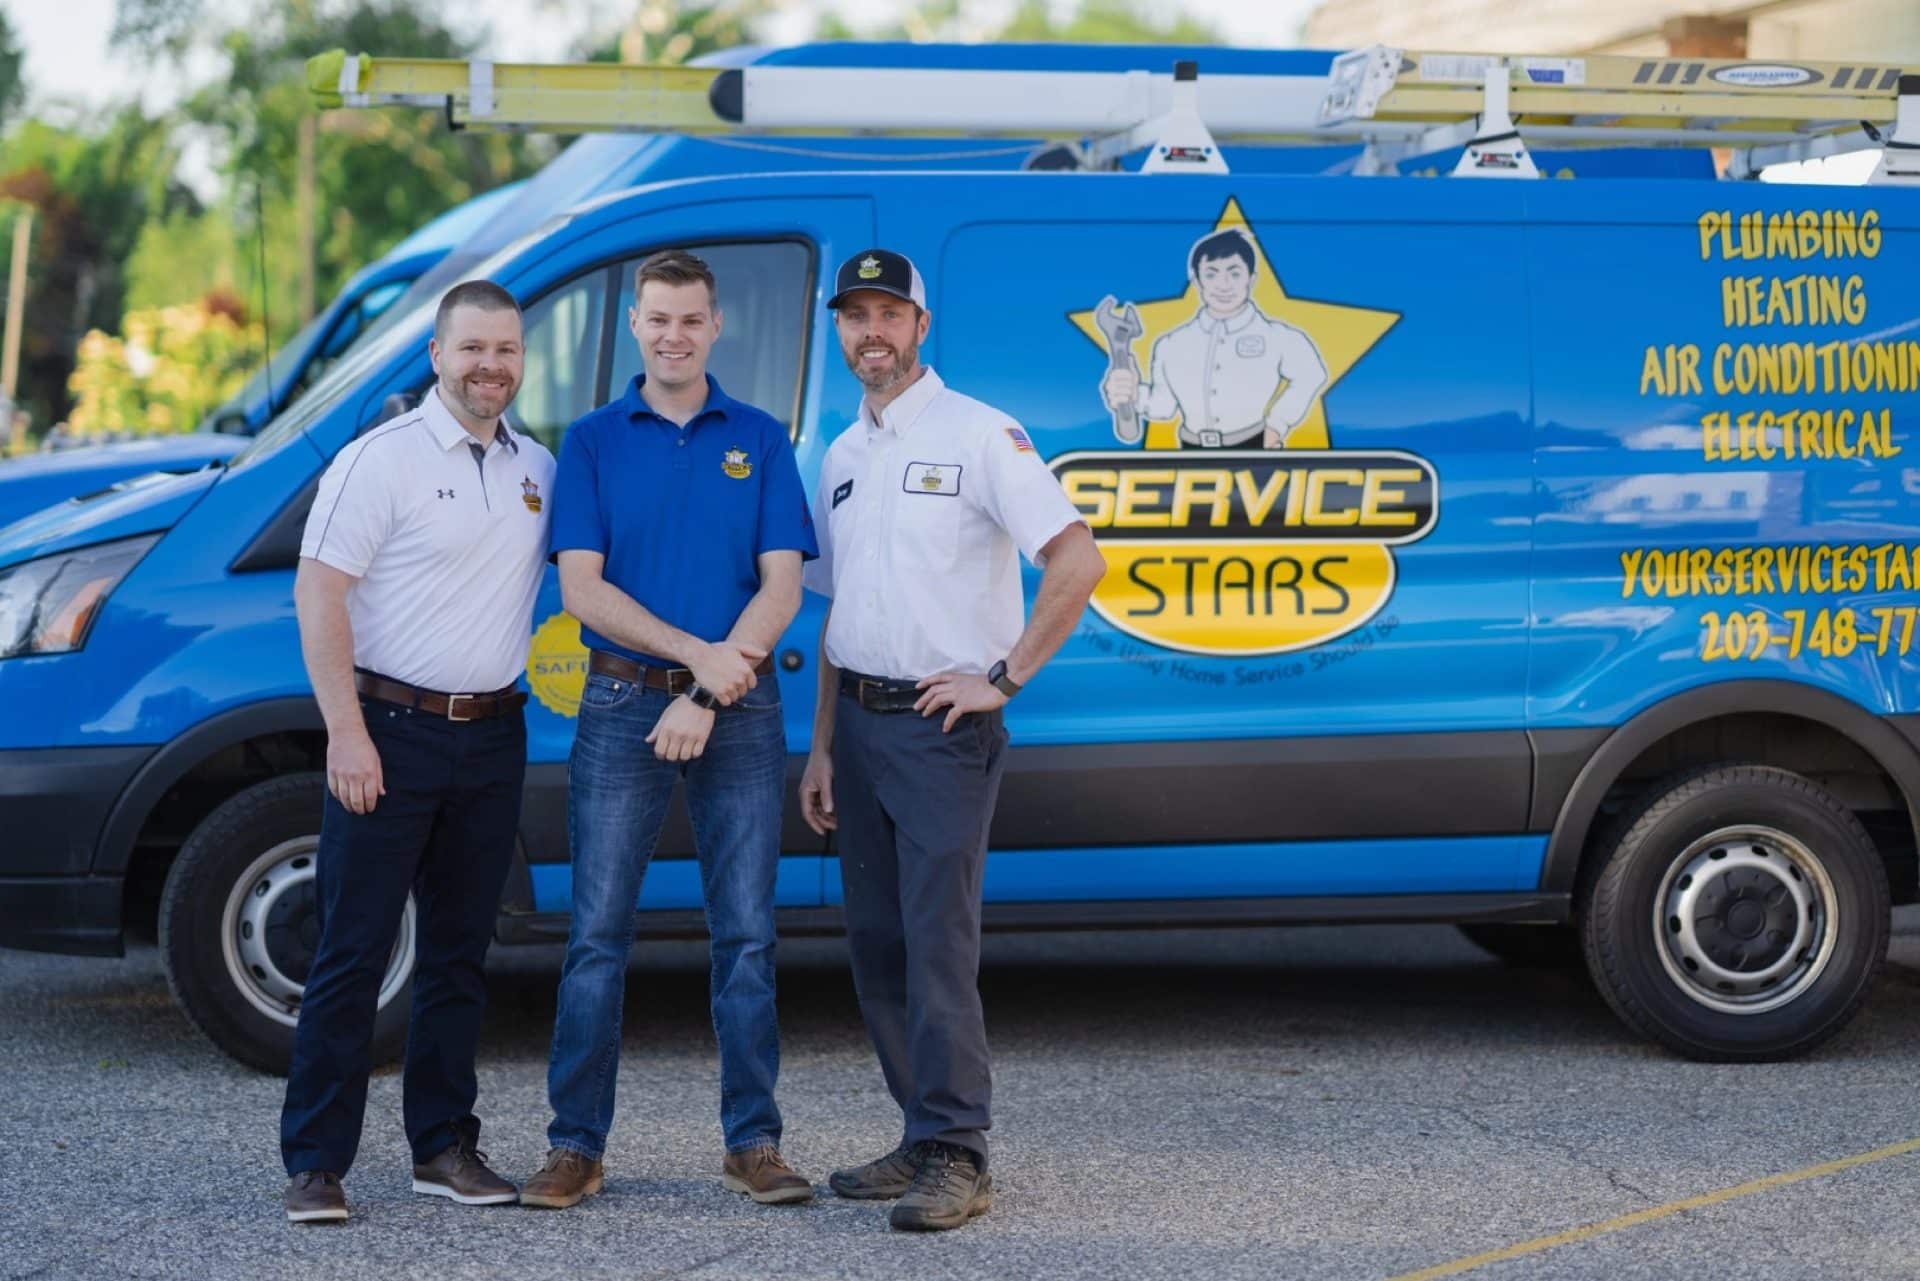 ServiceStars Team outside one of our vans.